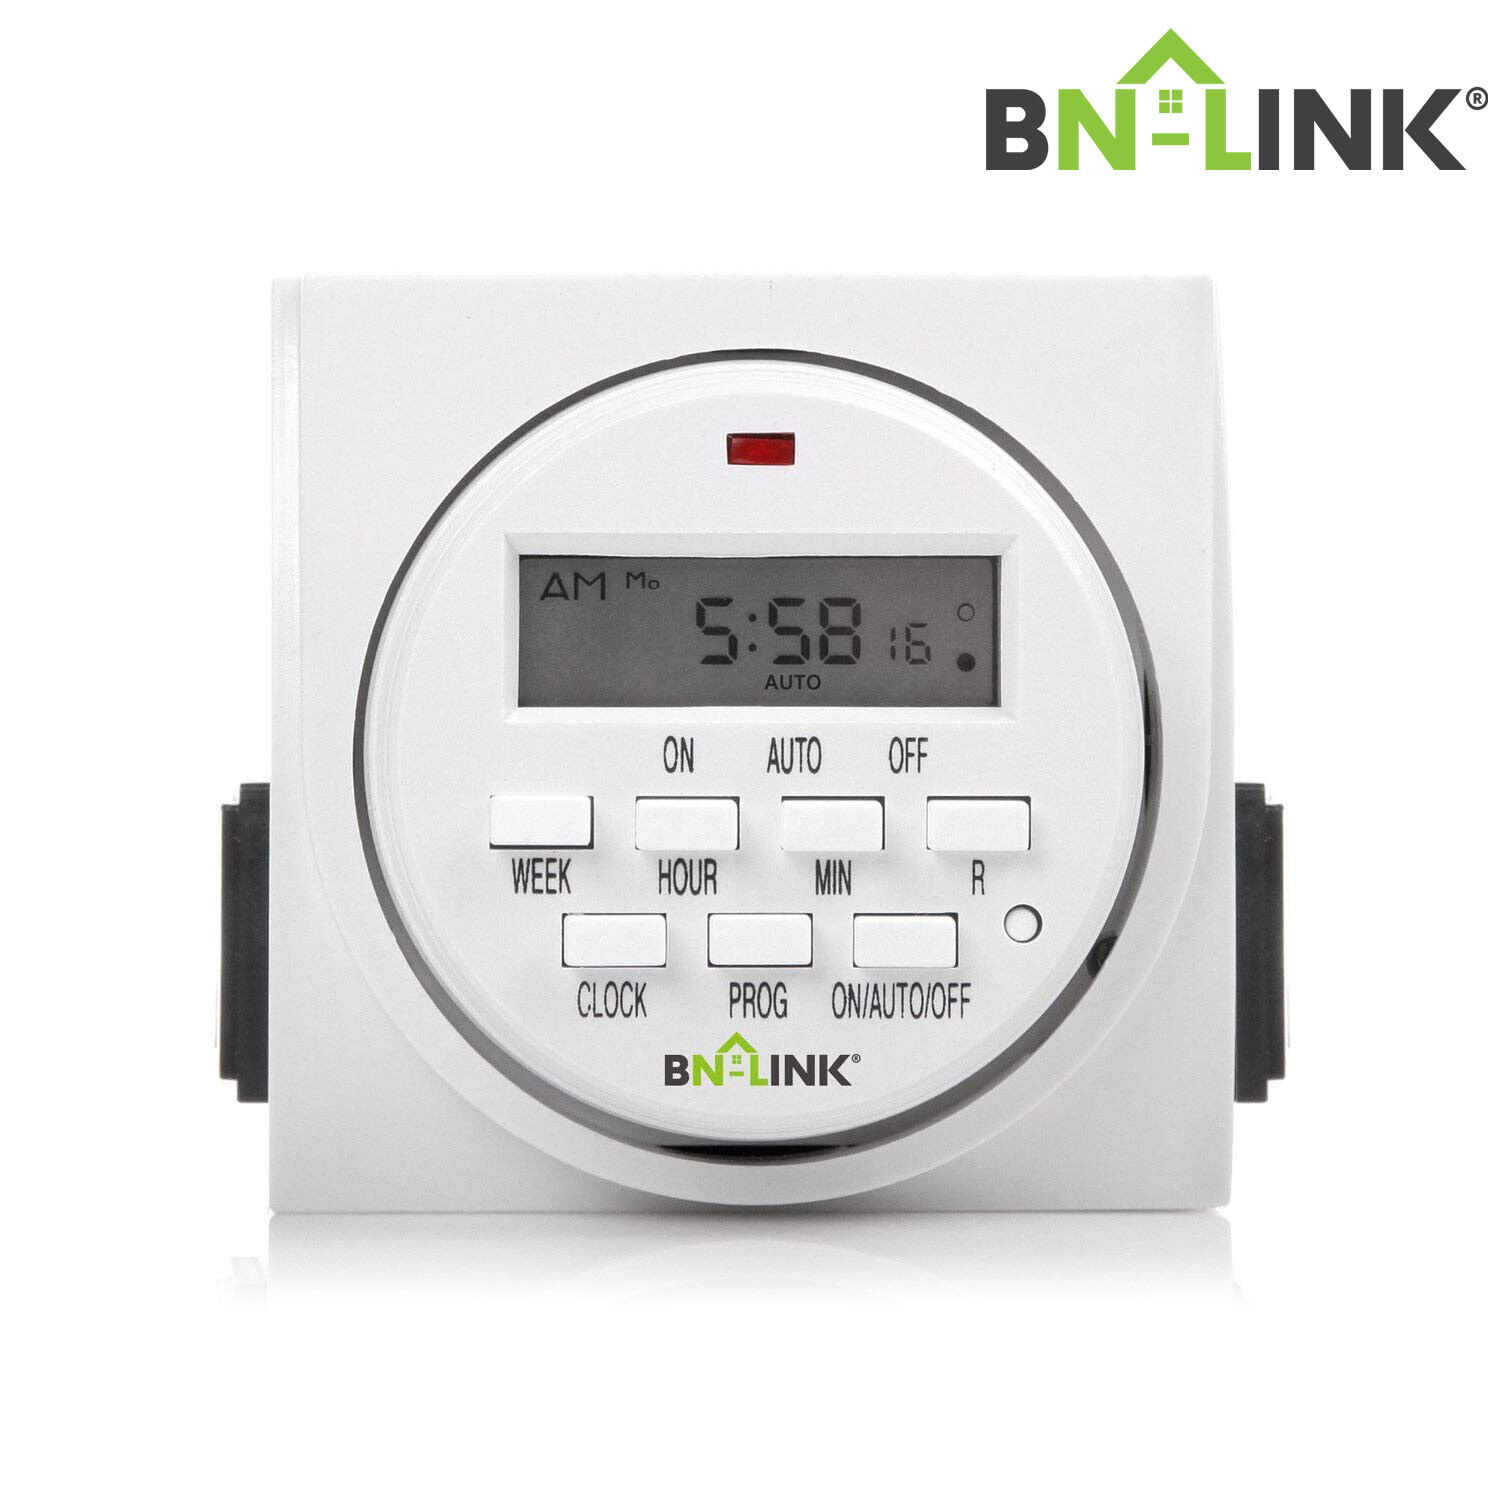 BN-LINK Heavy Duty Digital Electric Programmable Dual Outlet Timer Plug Indoor BN-LINK CECOMINOD043769